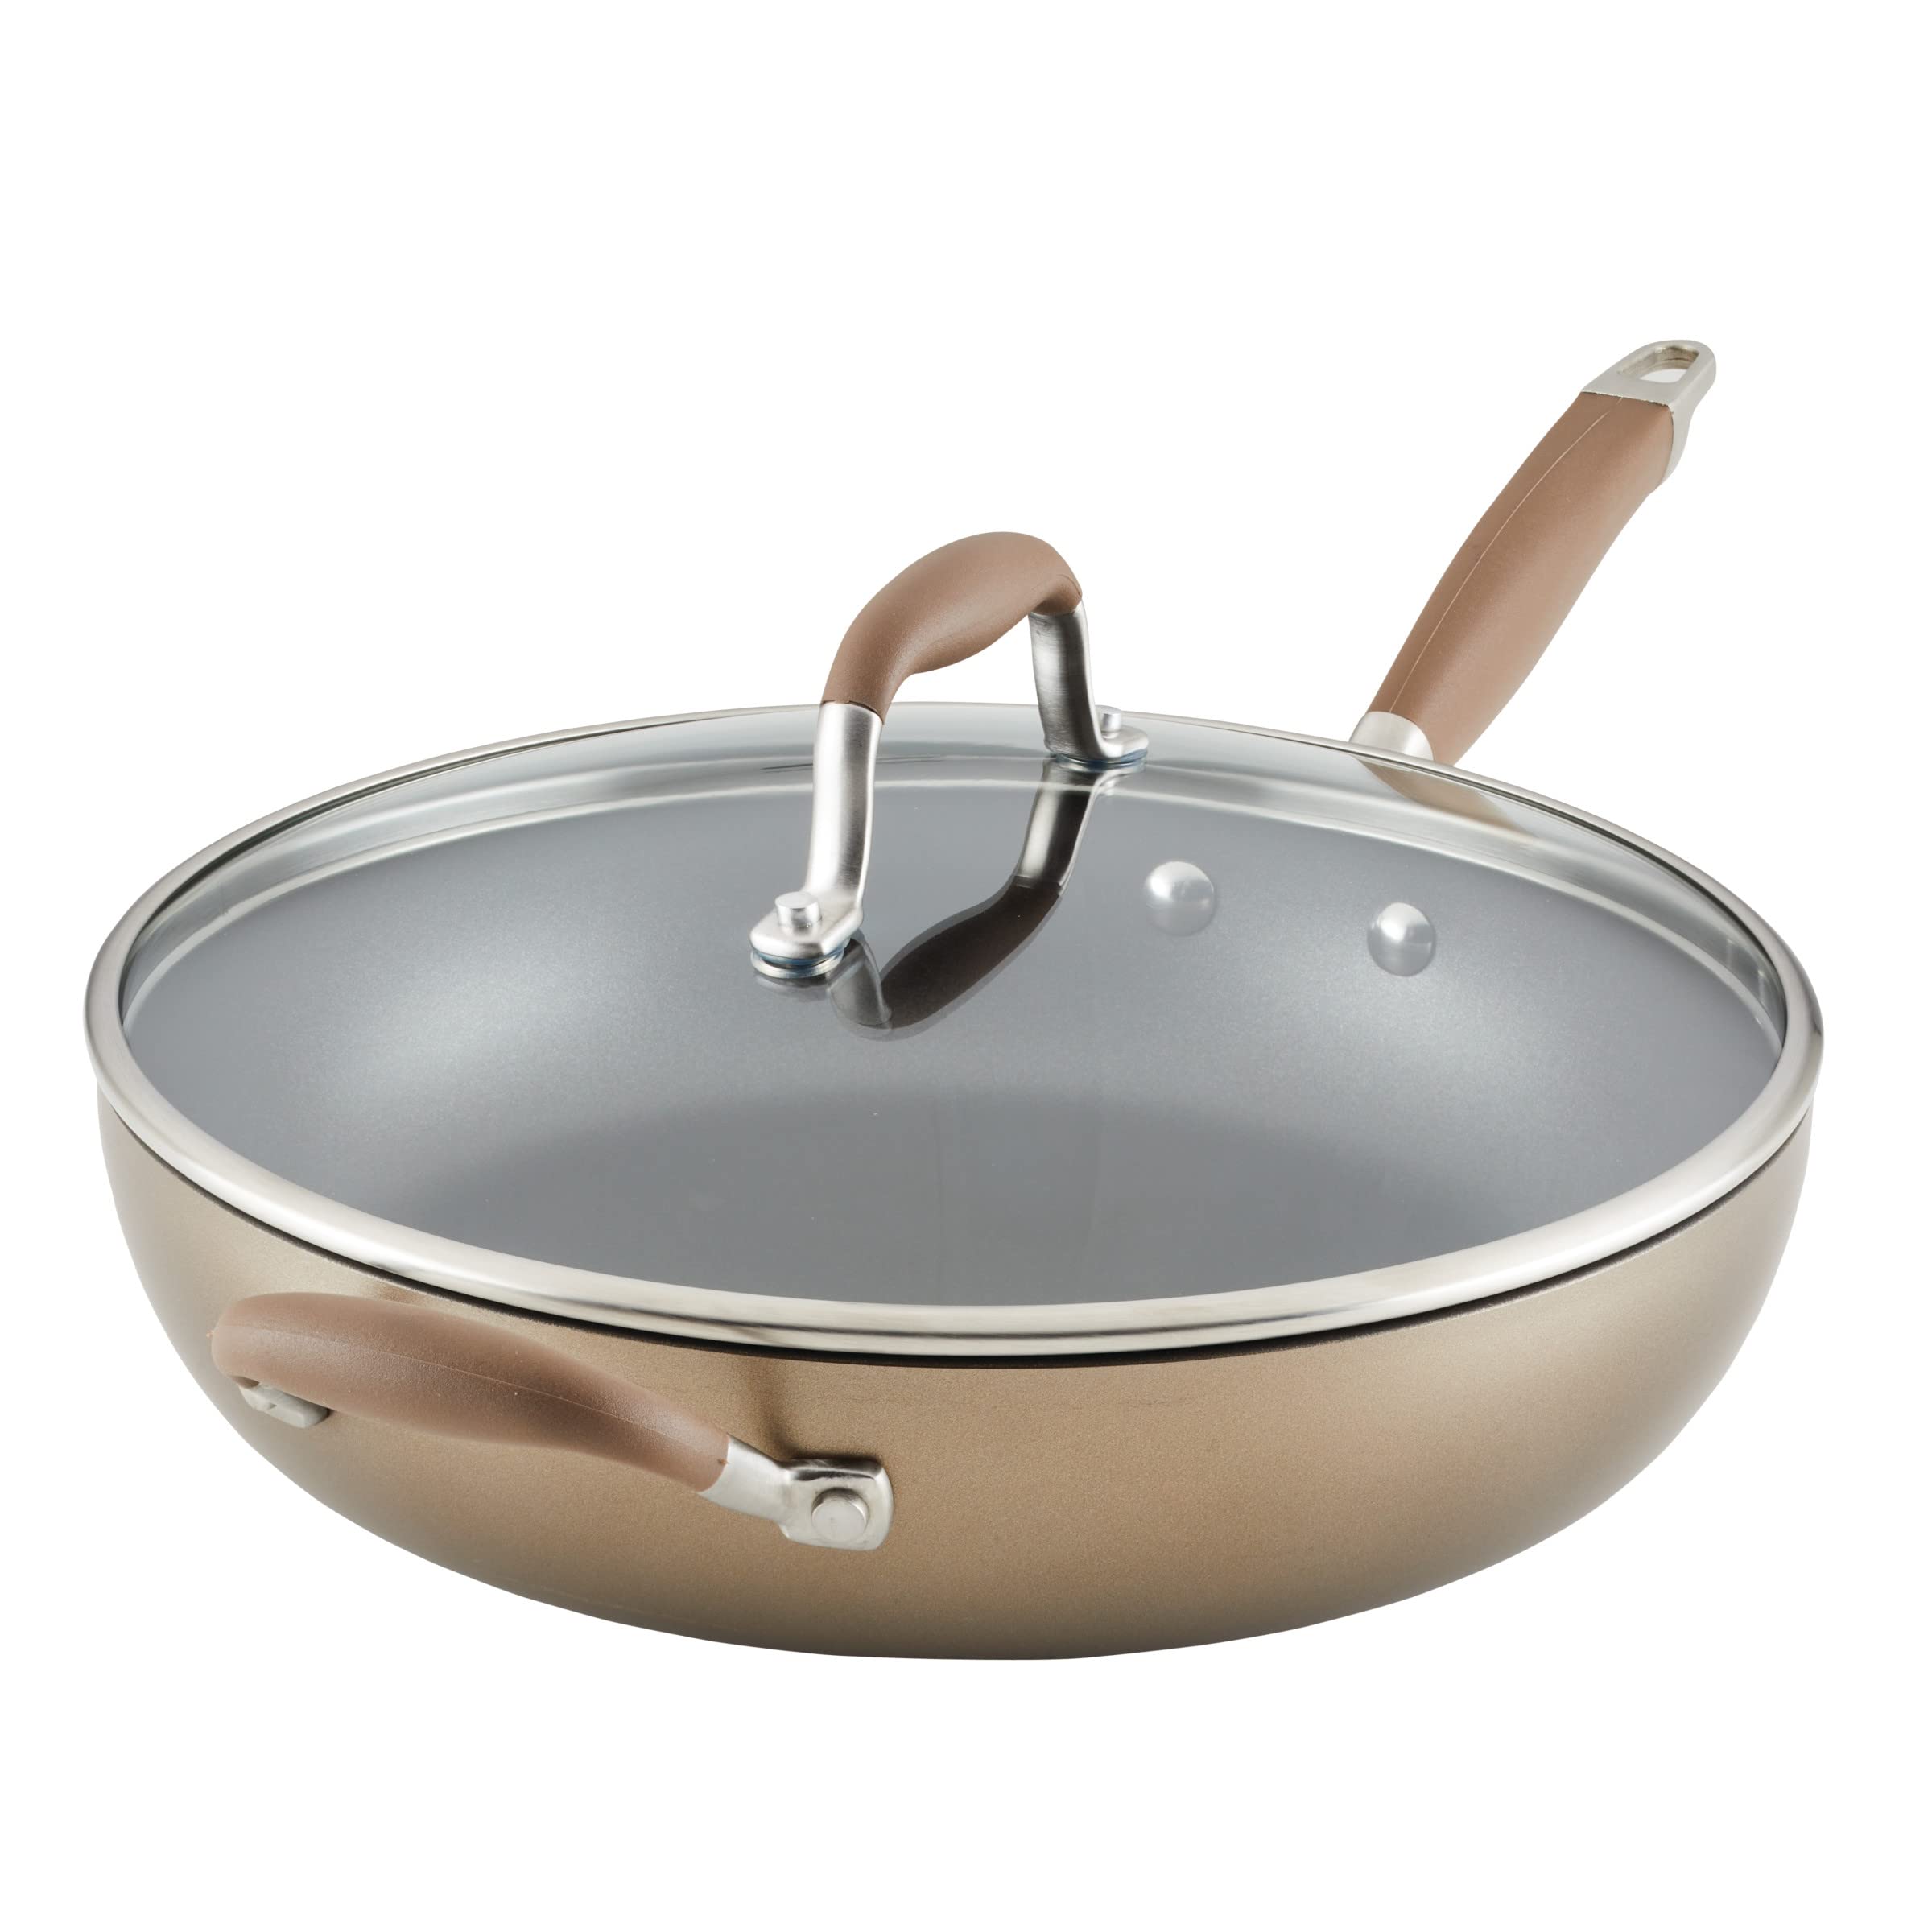 Anolon Advanced Hard Anodized Nonstick Deep Frying Pan/Skillet with Lid, 12 Inch, Bronze